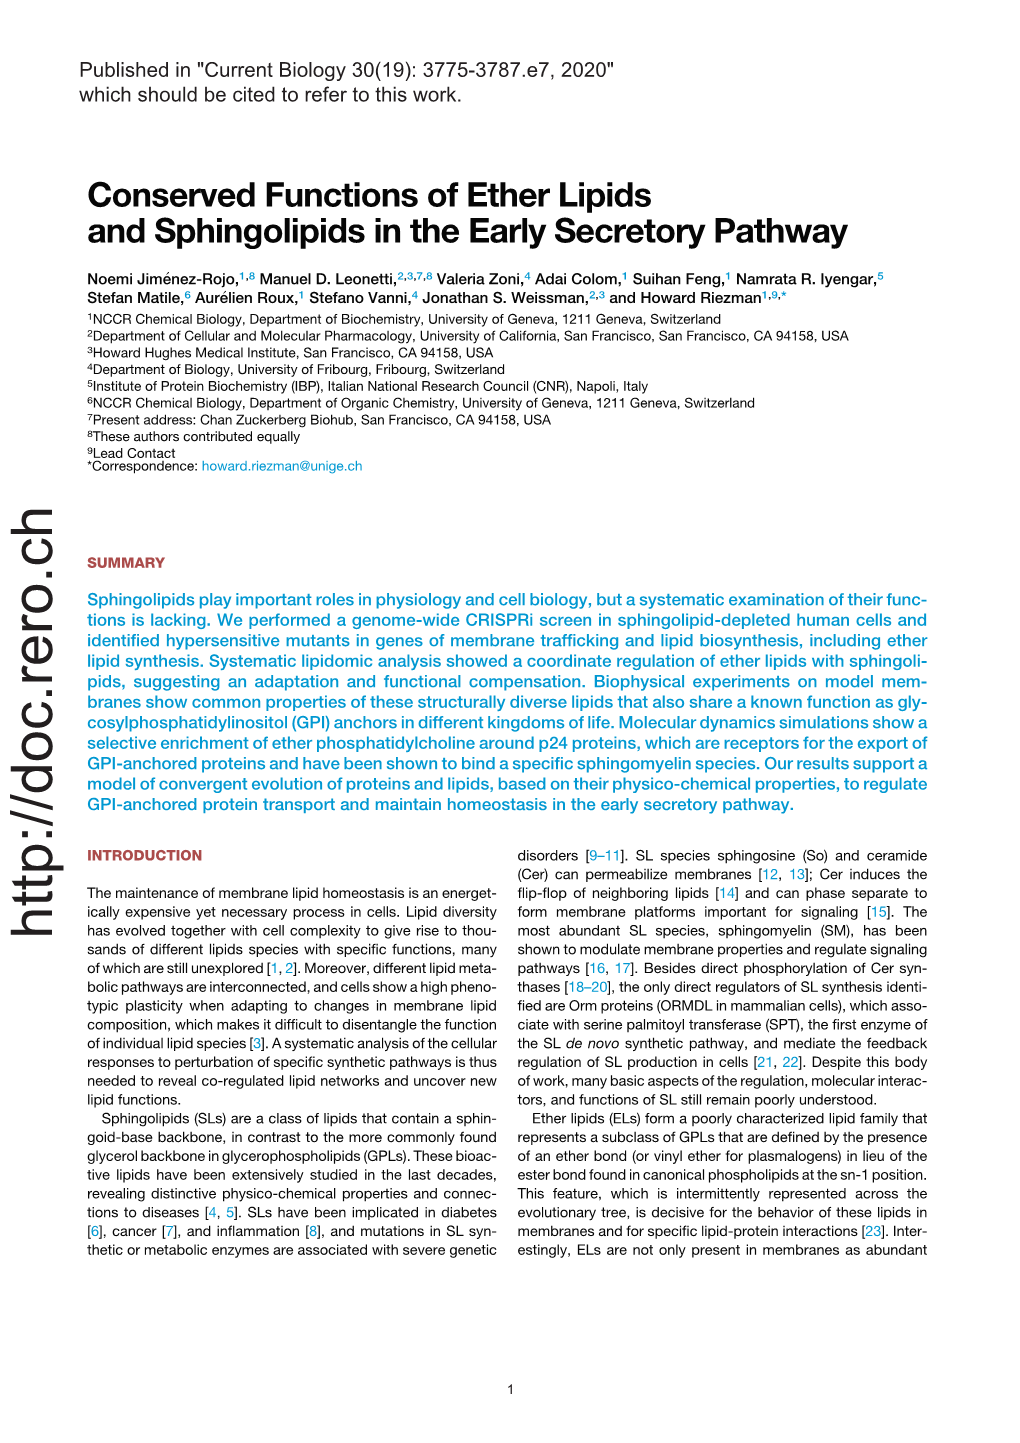 Conserved Functions of Ether Lipids and Sphingolipids in the Early Secretory Pathway